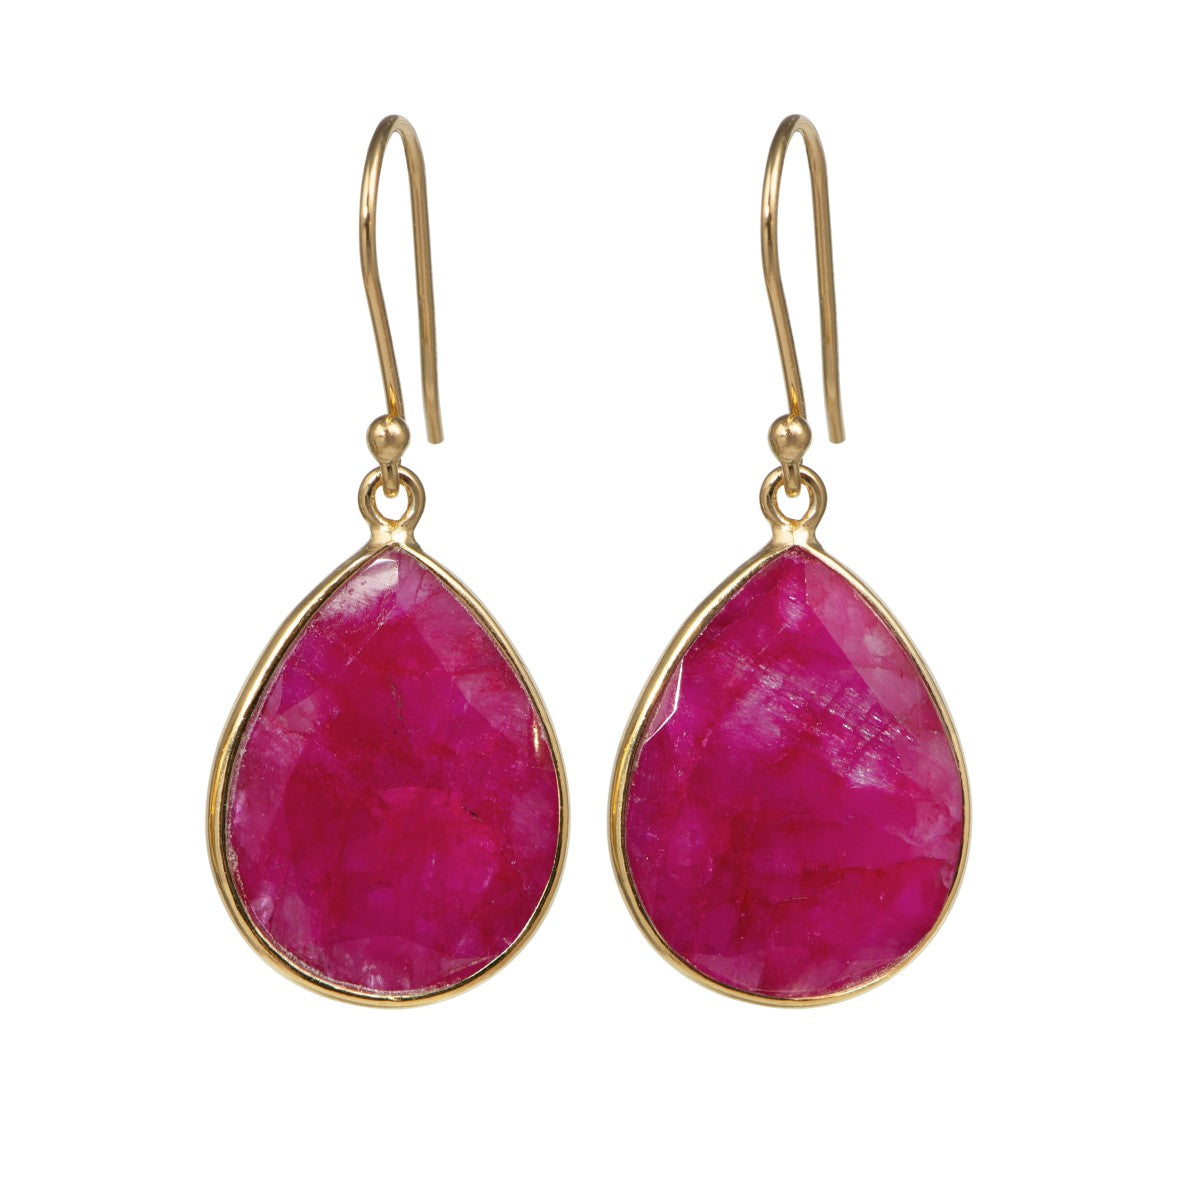 Ruby Quartz Gold Plated Sterling Silver Earrings with a Tear Drop Shaped Gemstone